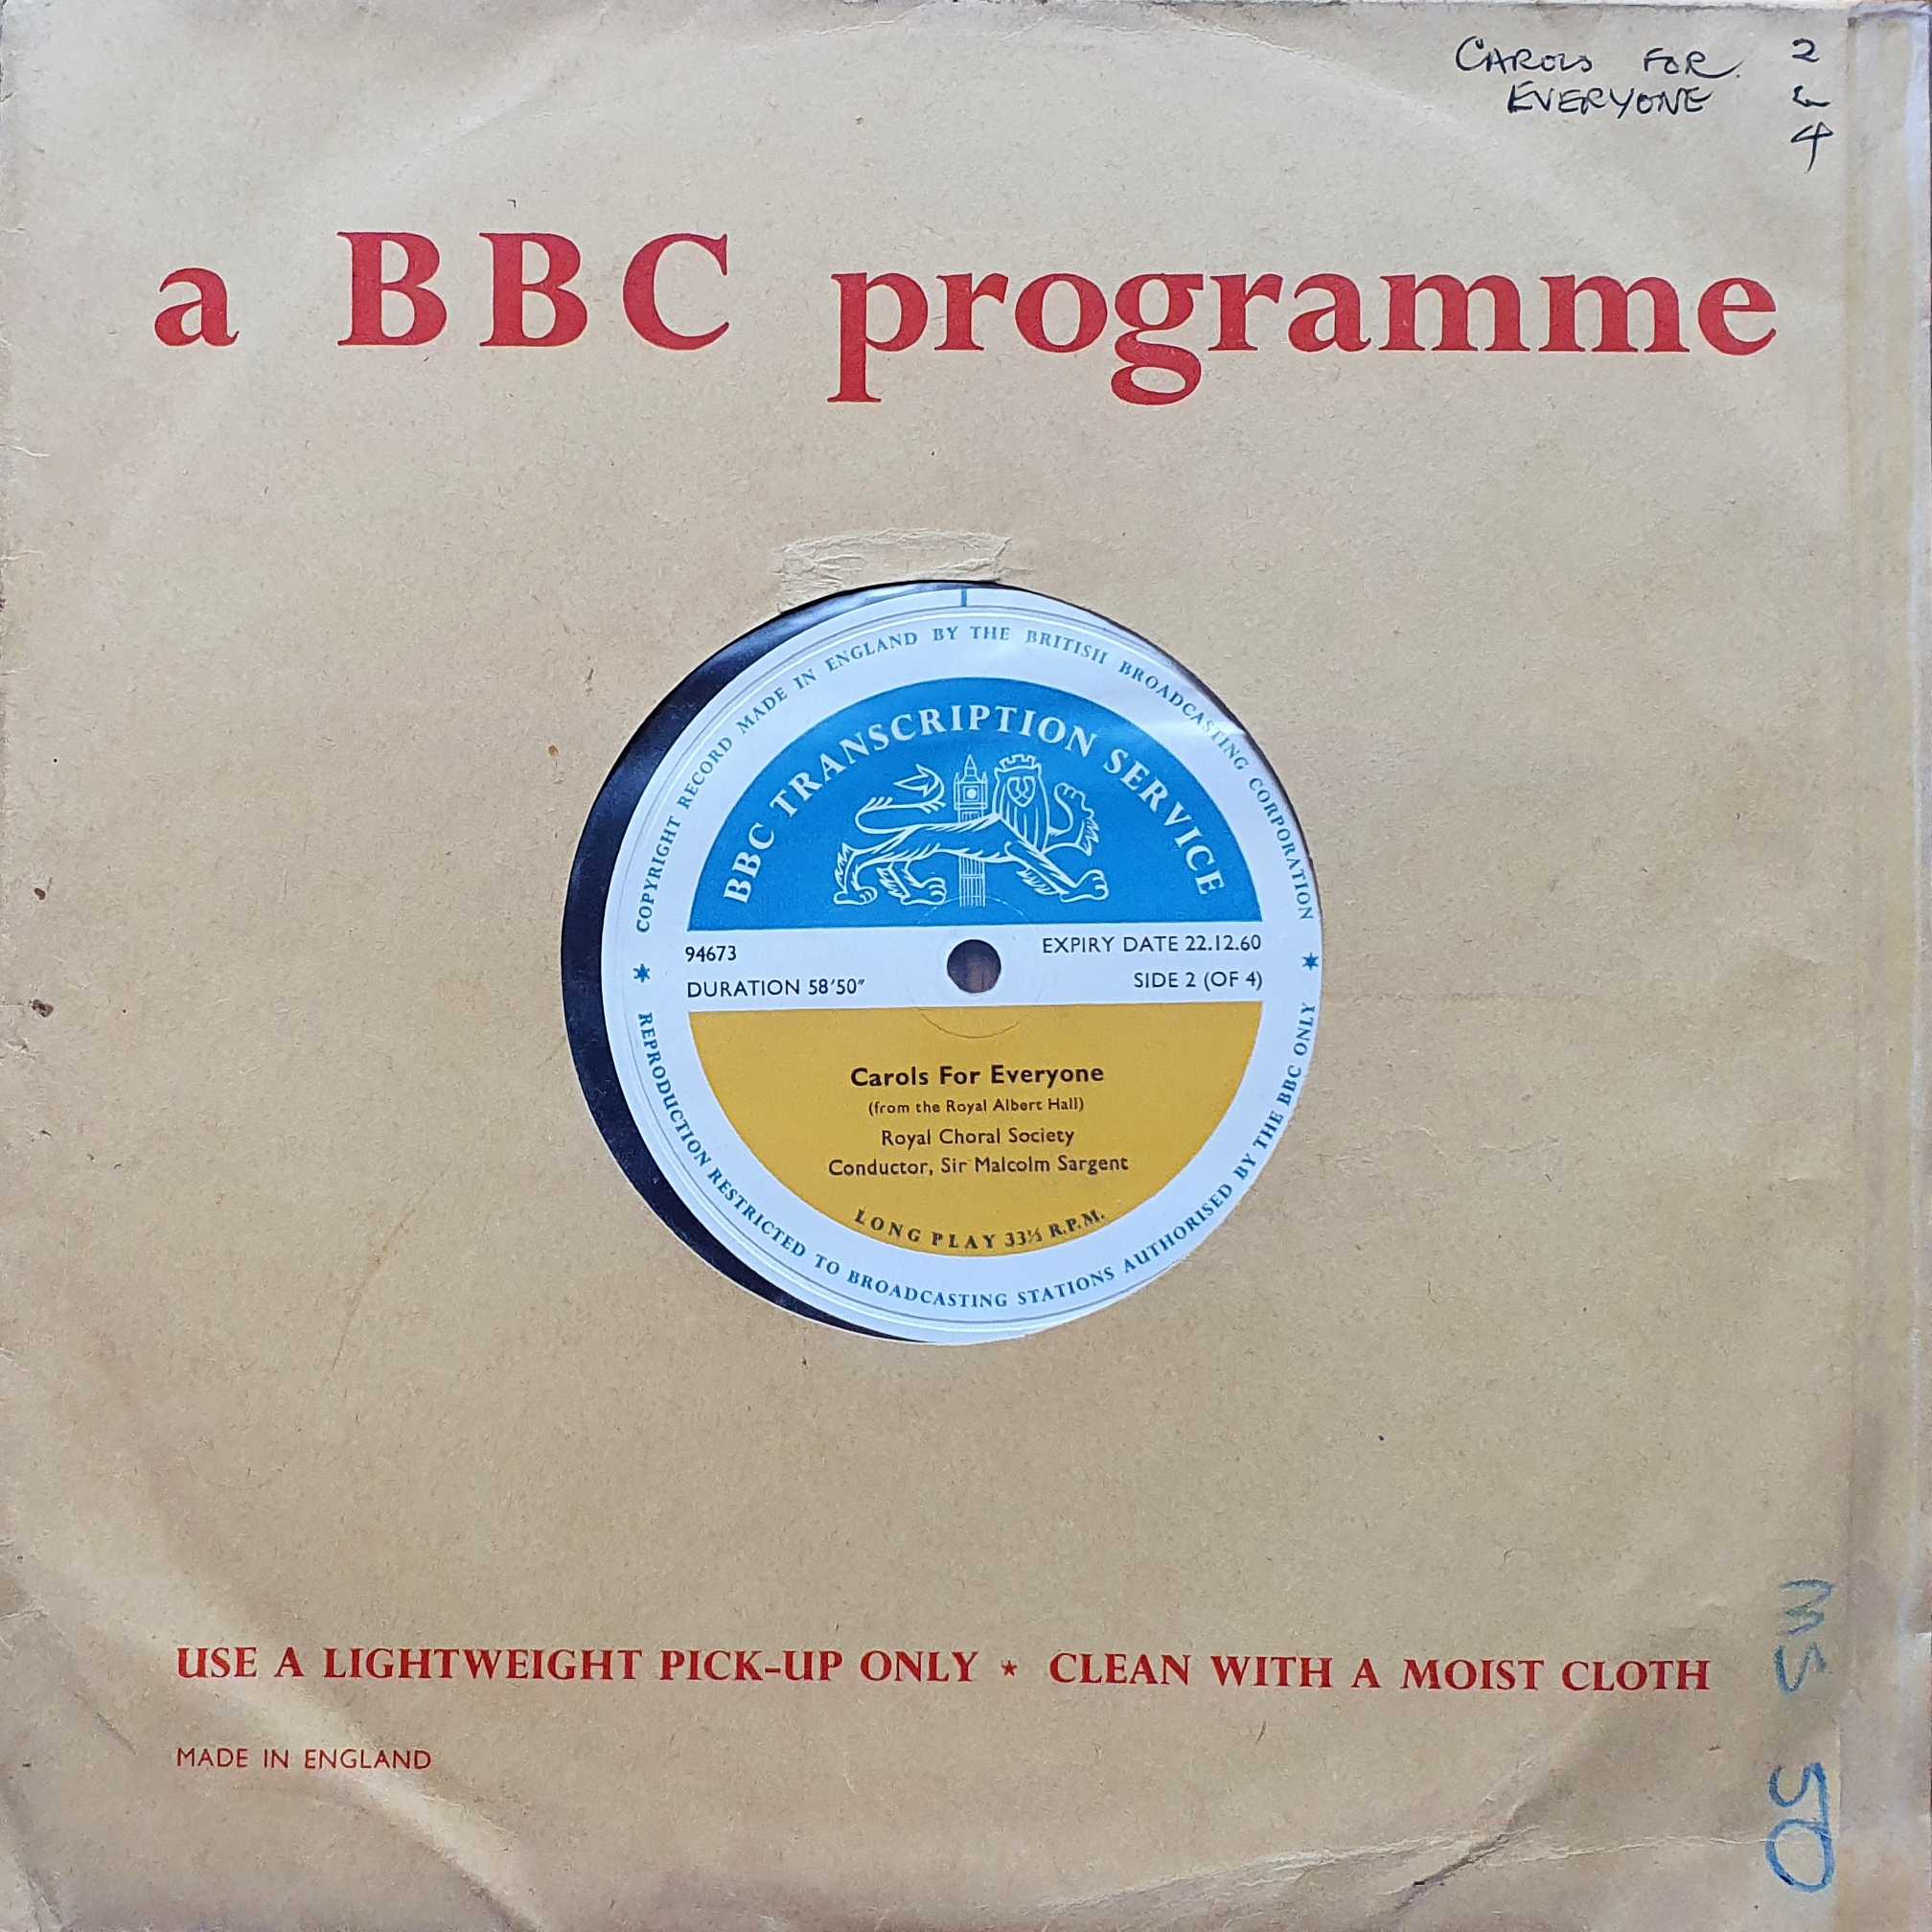 Picture of 94673 Carols for everyone (Sides 2 & 4 of 4) by artist Various from the BBC 10inches - Records and Tapes library